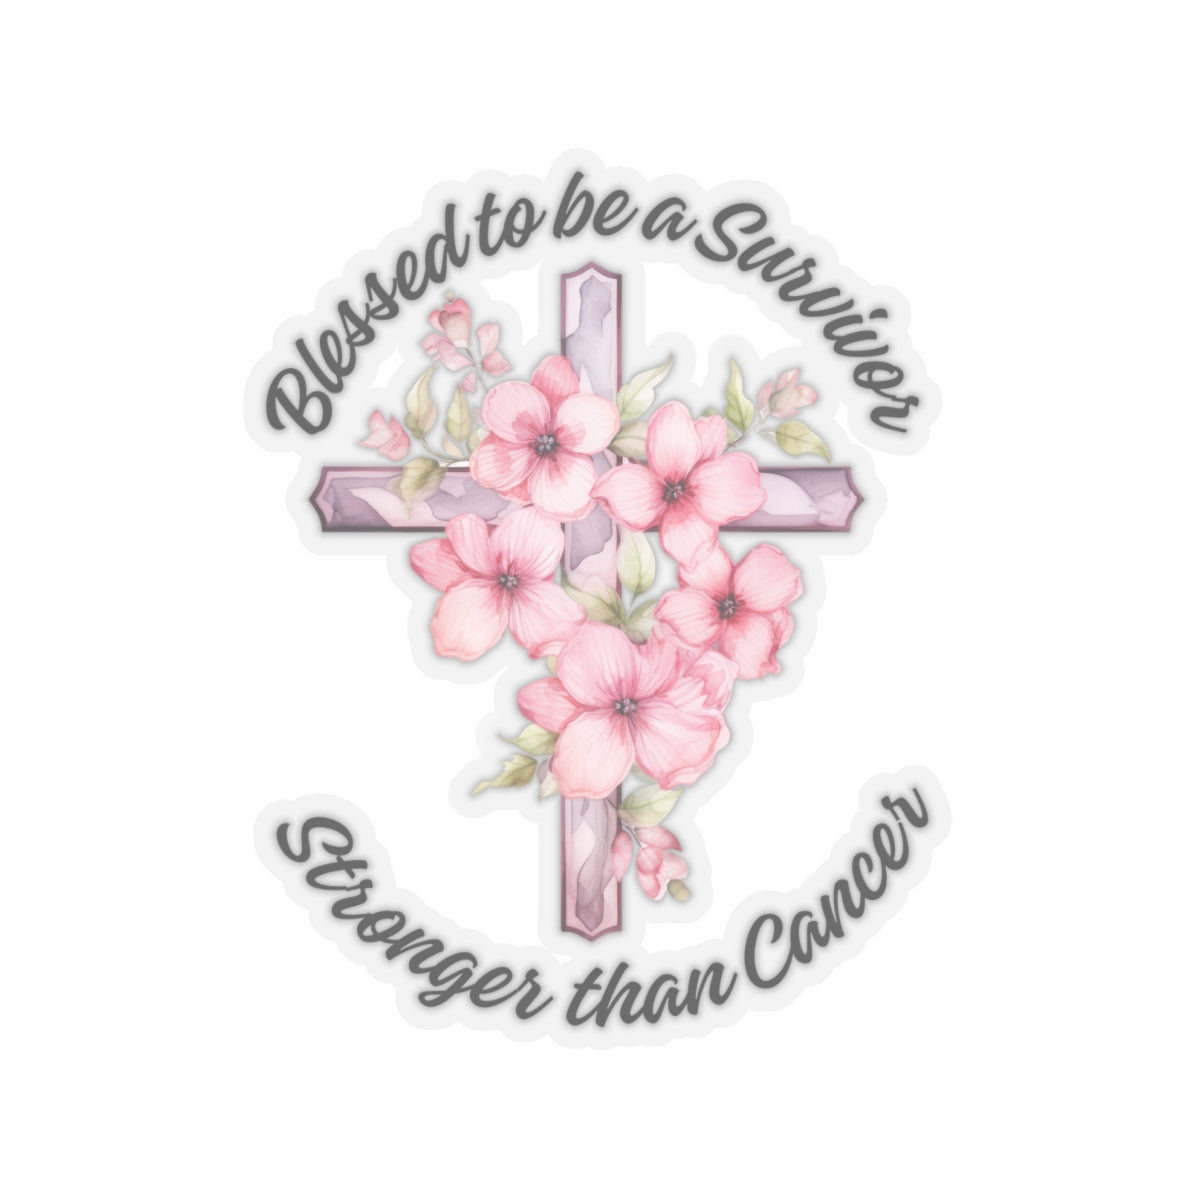 Blessed to Be A Survivor...Inspirational Quote Kiss-Cut Stickers-Paper products-6" × 6"-Transparent-mysticalcherry